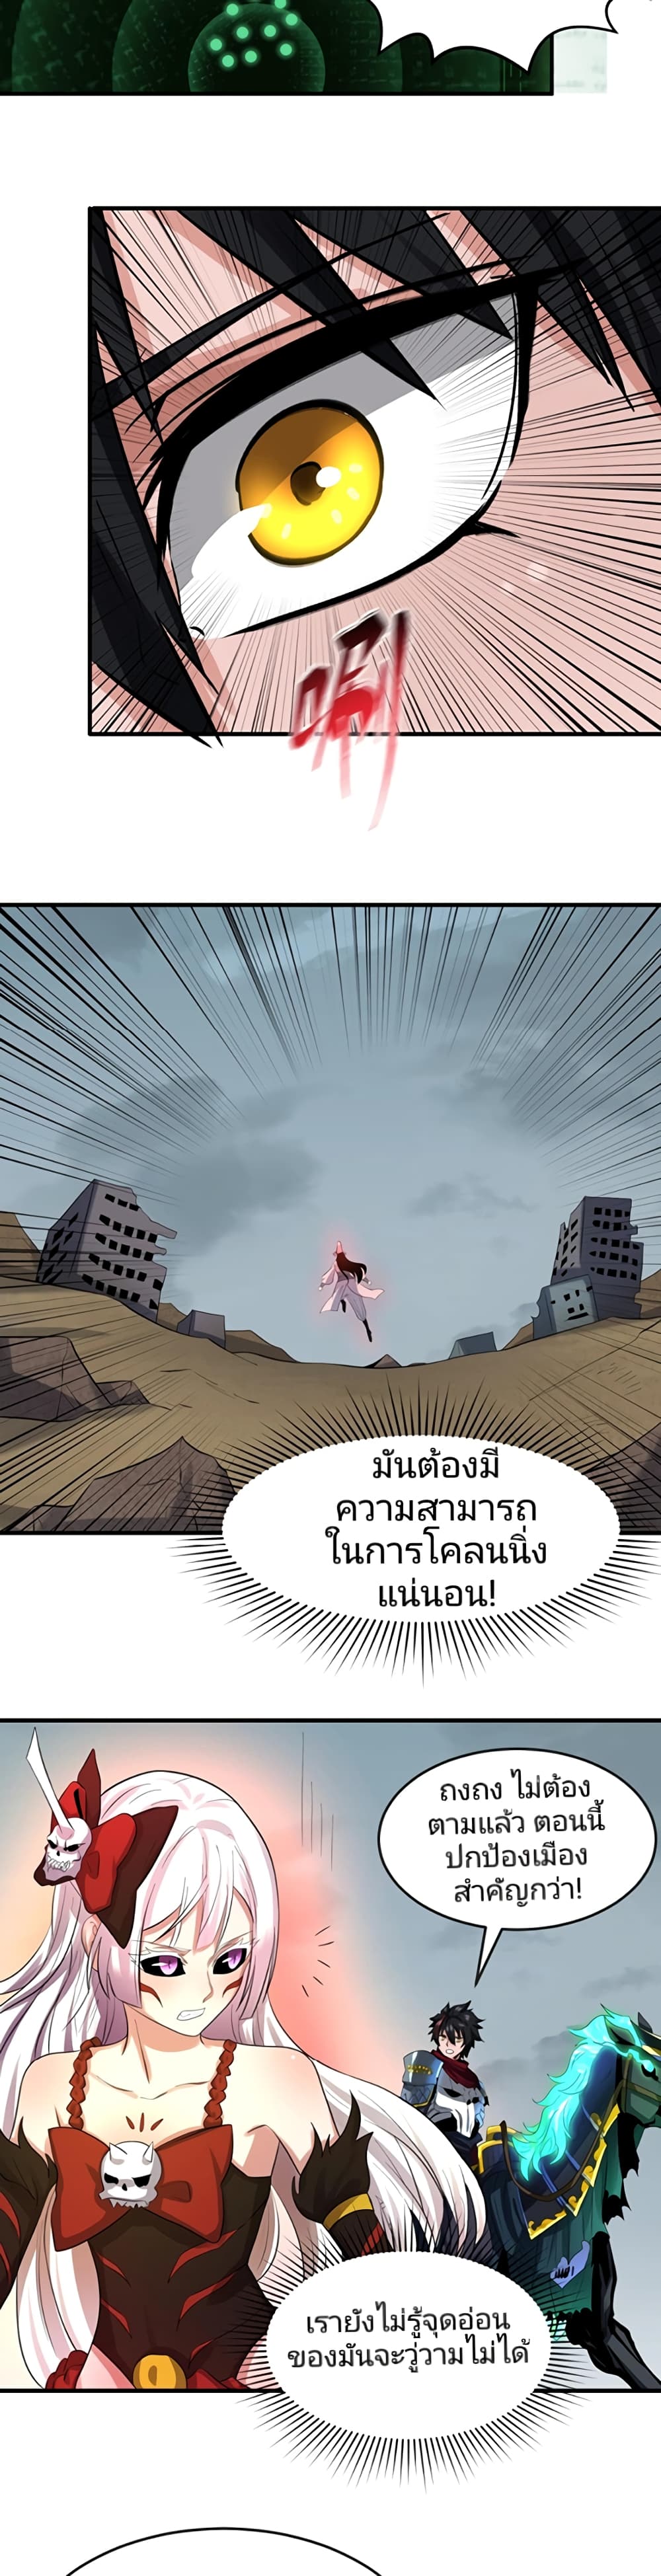 The Age of Ghost Spirits à¸à¸­à¸à¸à¸µà¹ 31 (13)